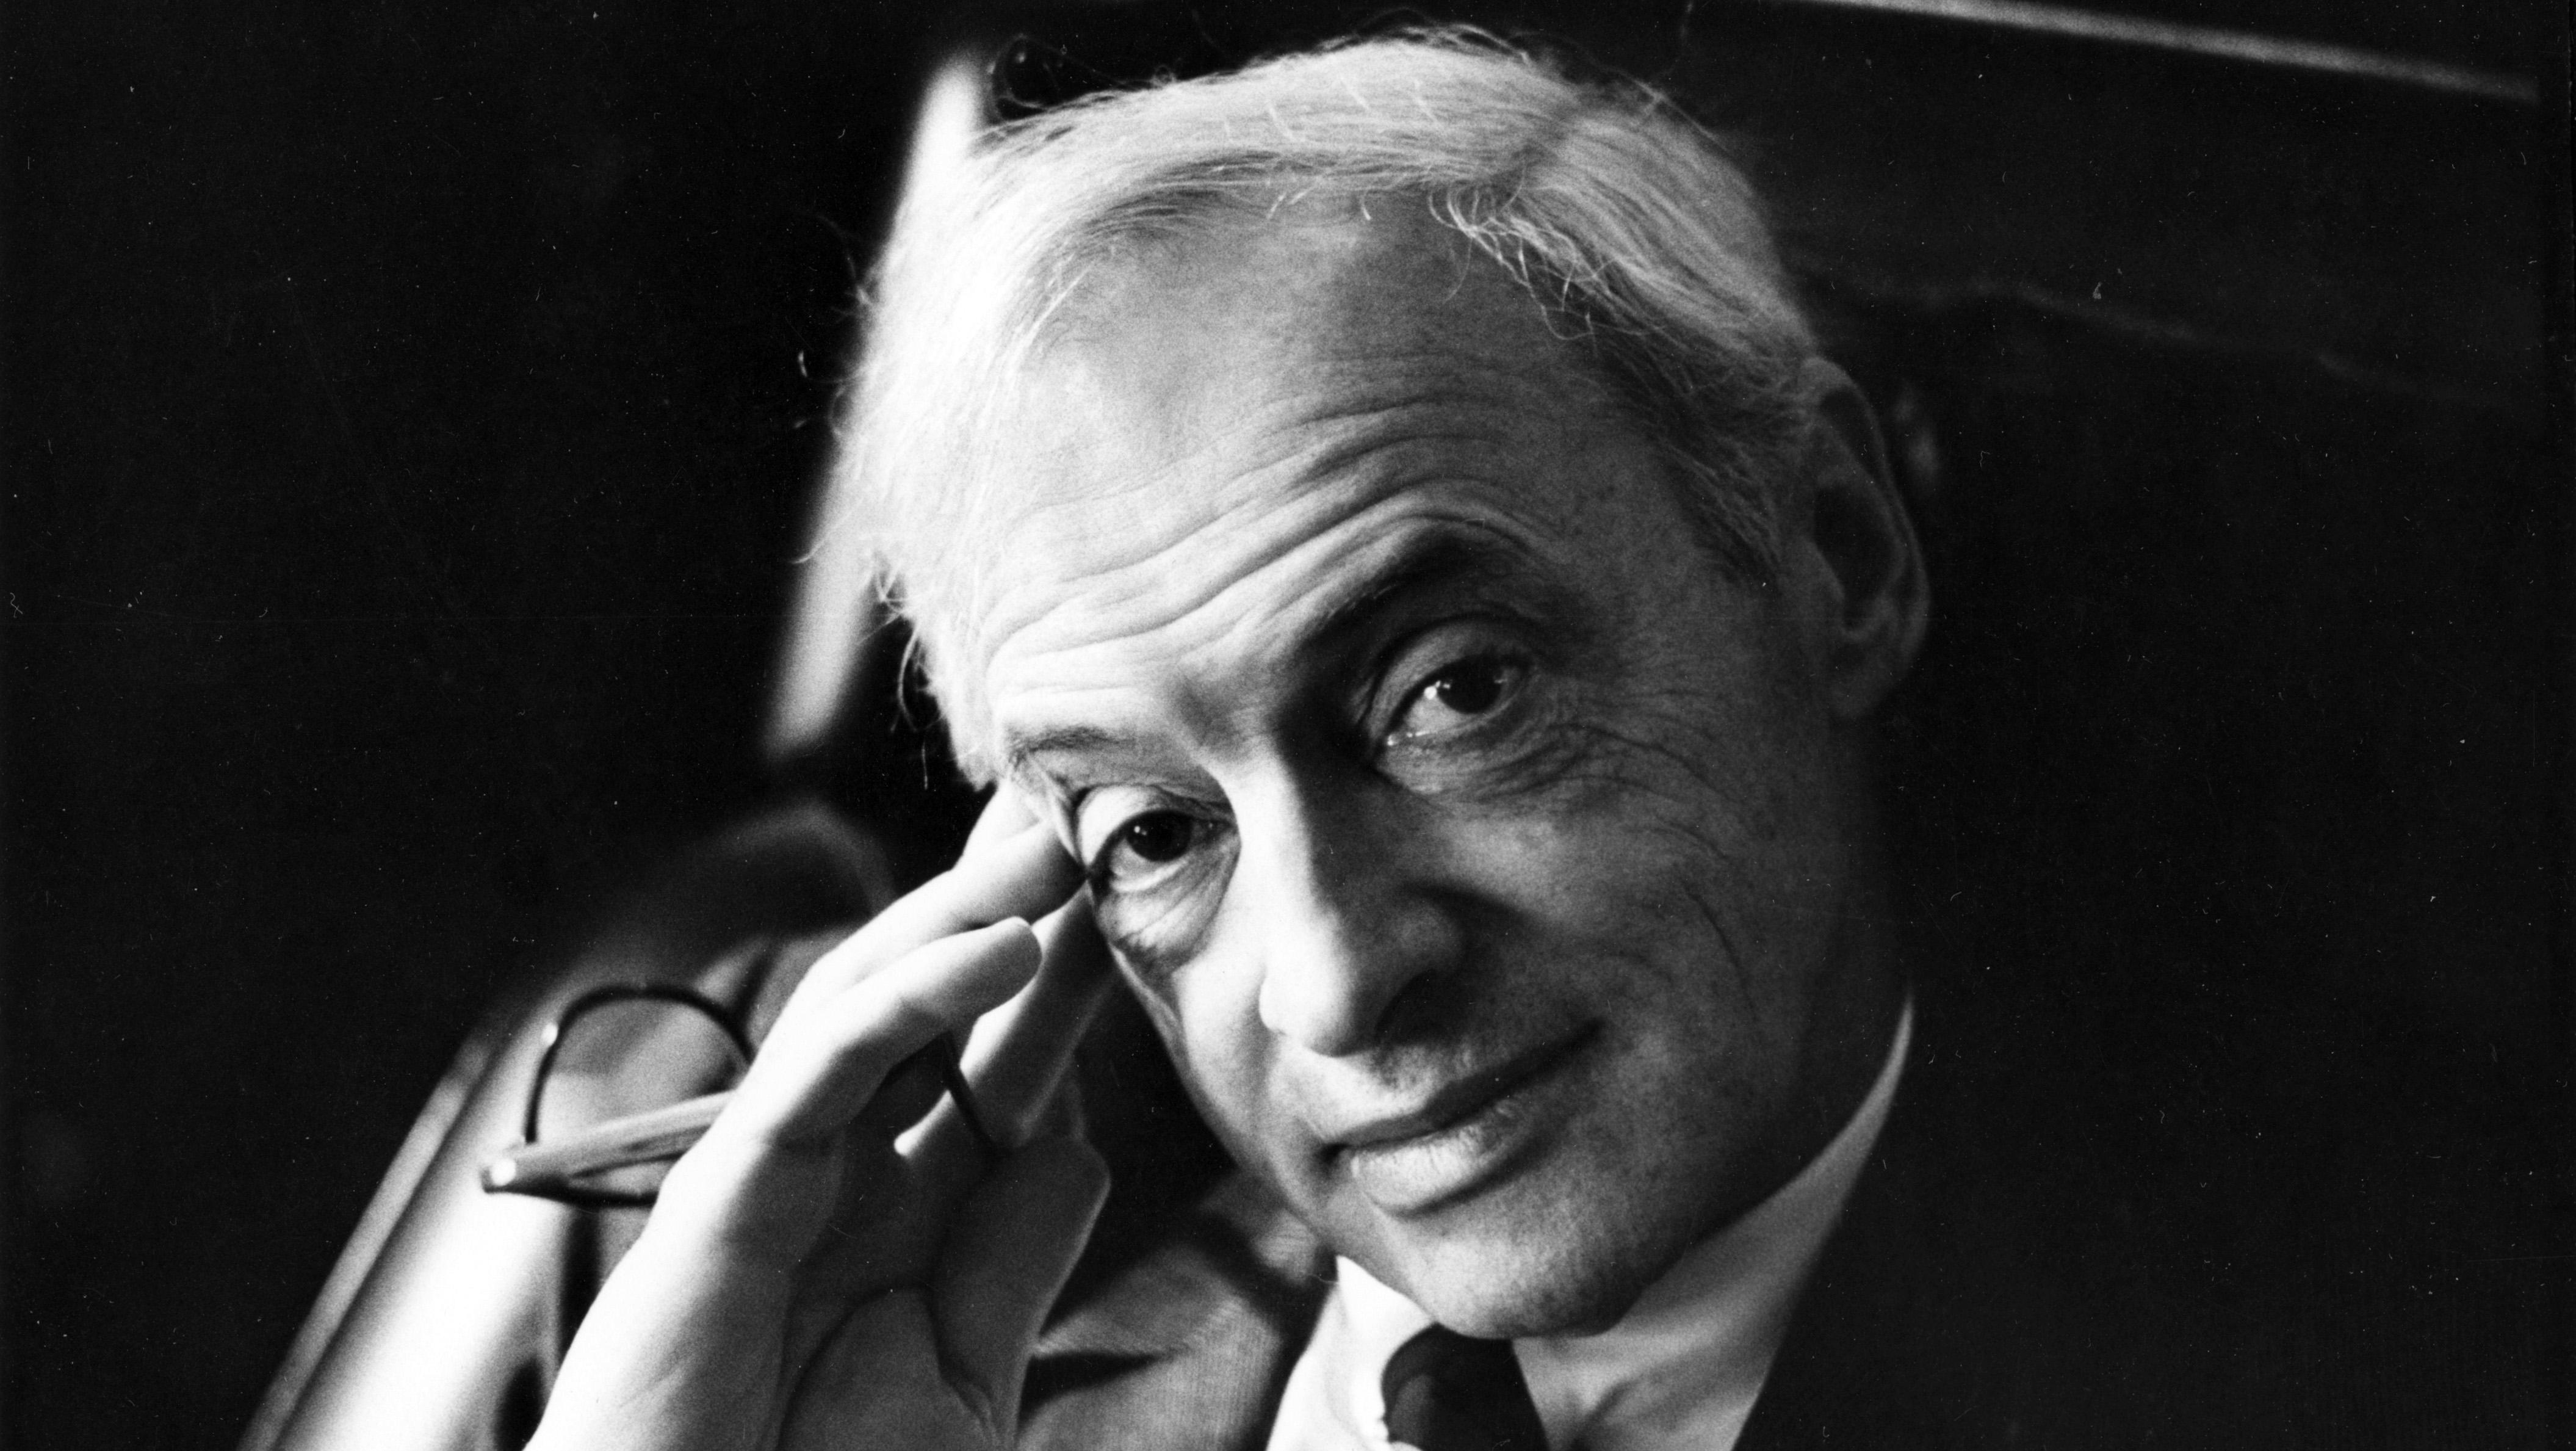 Nobel laureate Saul Bellow's papers are now available at the University of Chicago's library. (Courtesy of University of Chicago Special Collections Research Center)